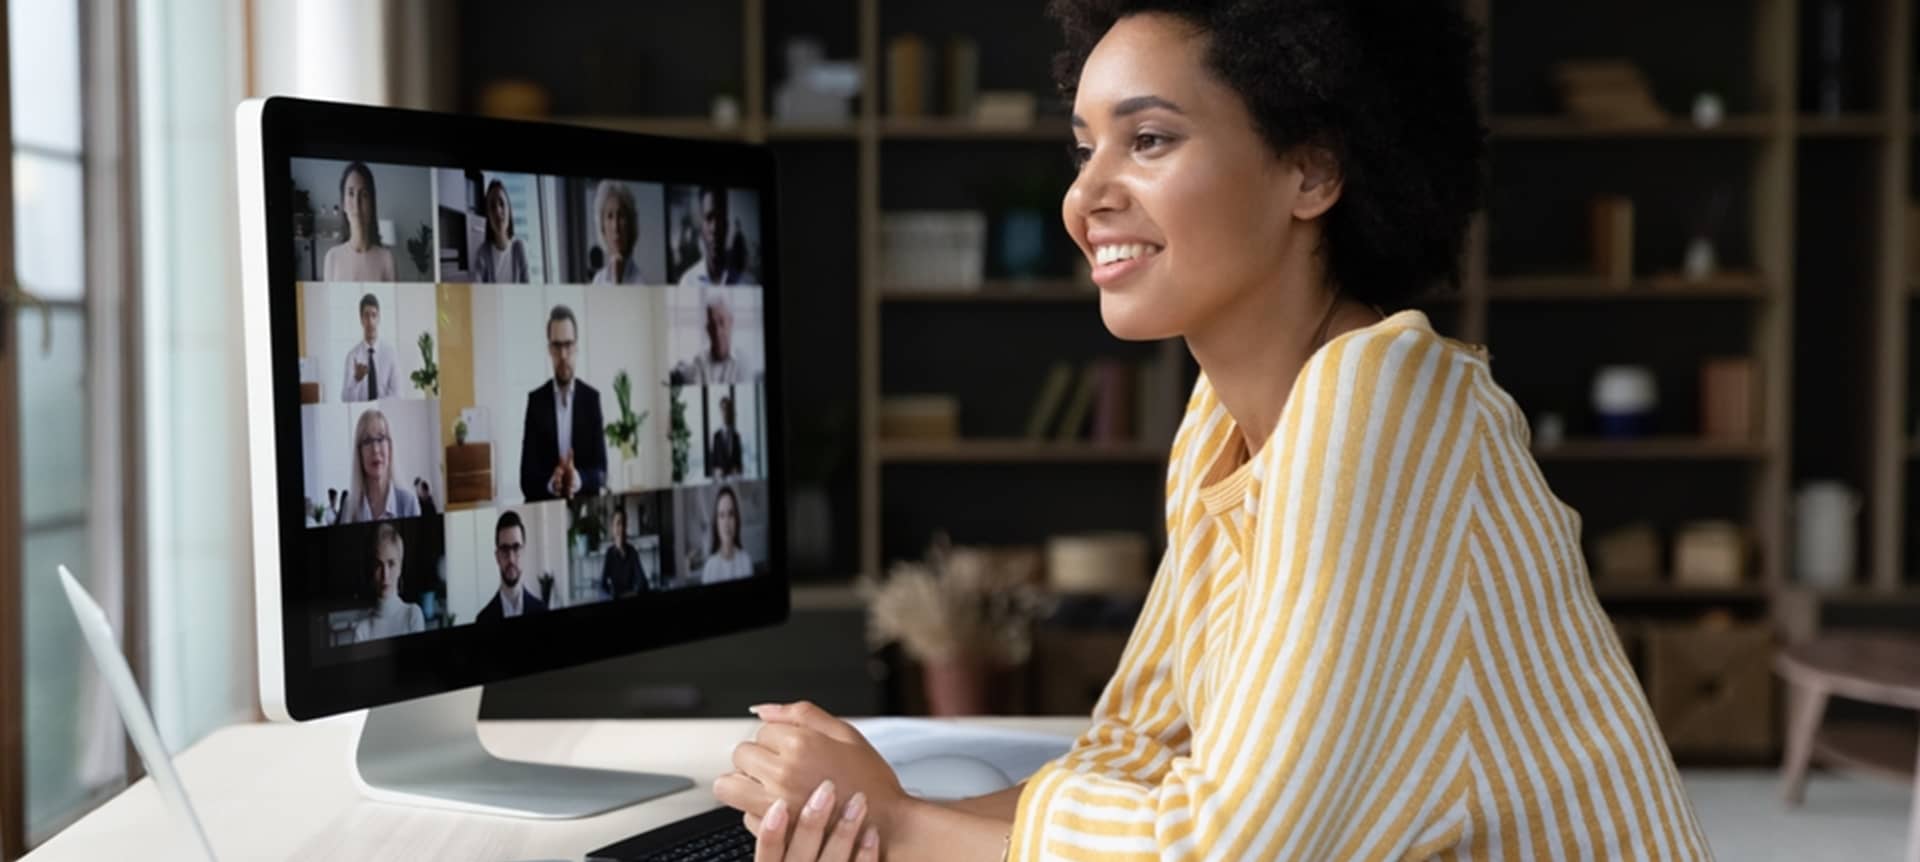 A female candidate being interviewed via video interviewing software